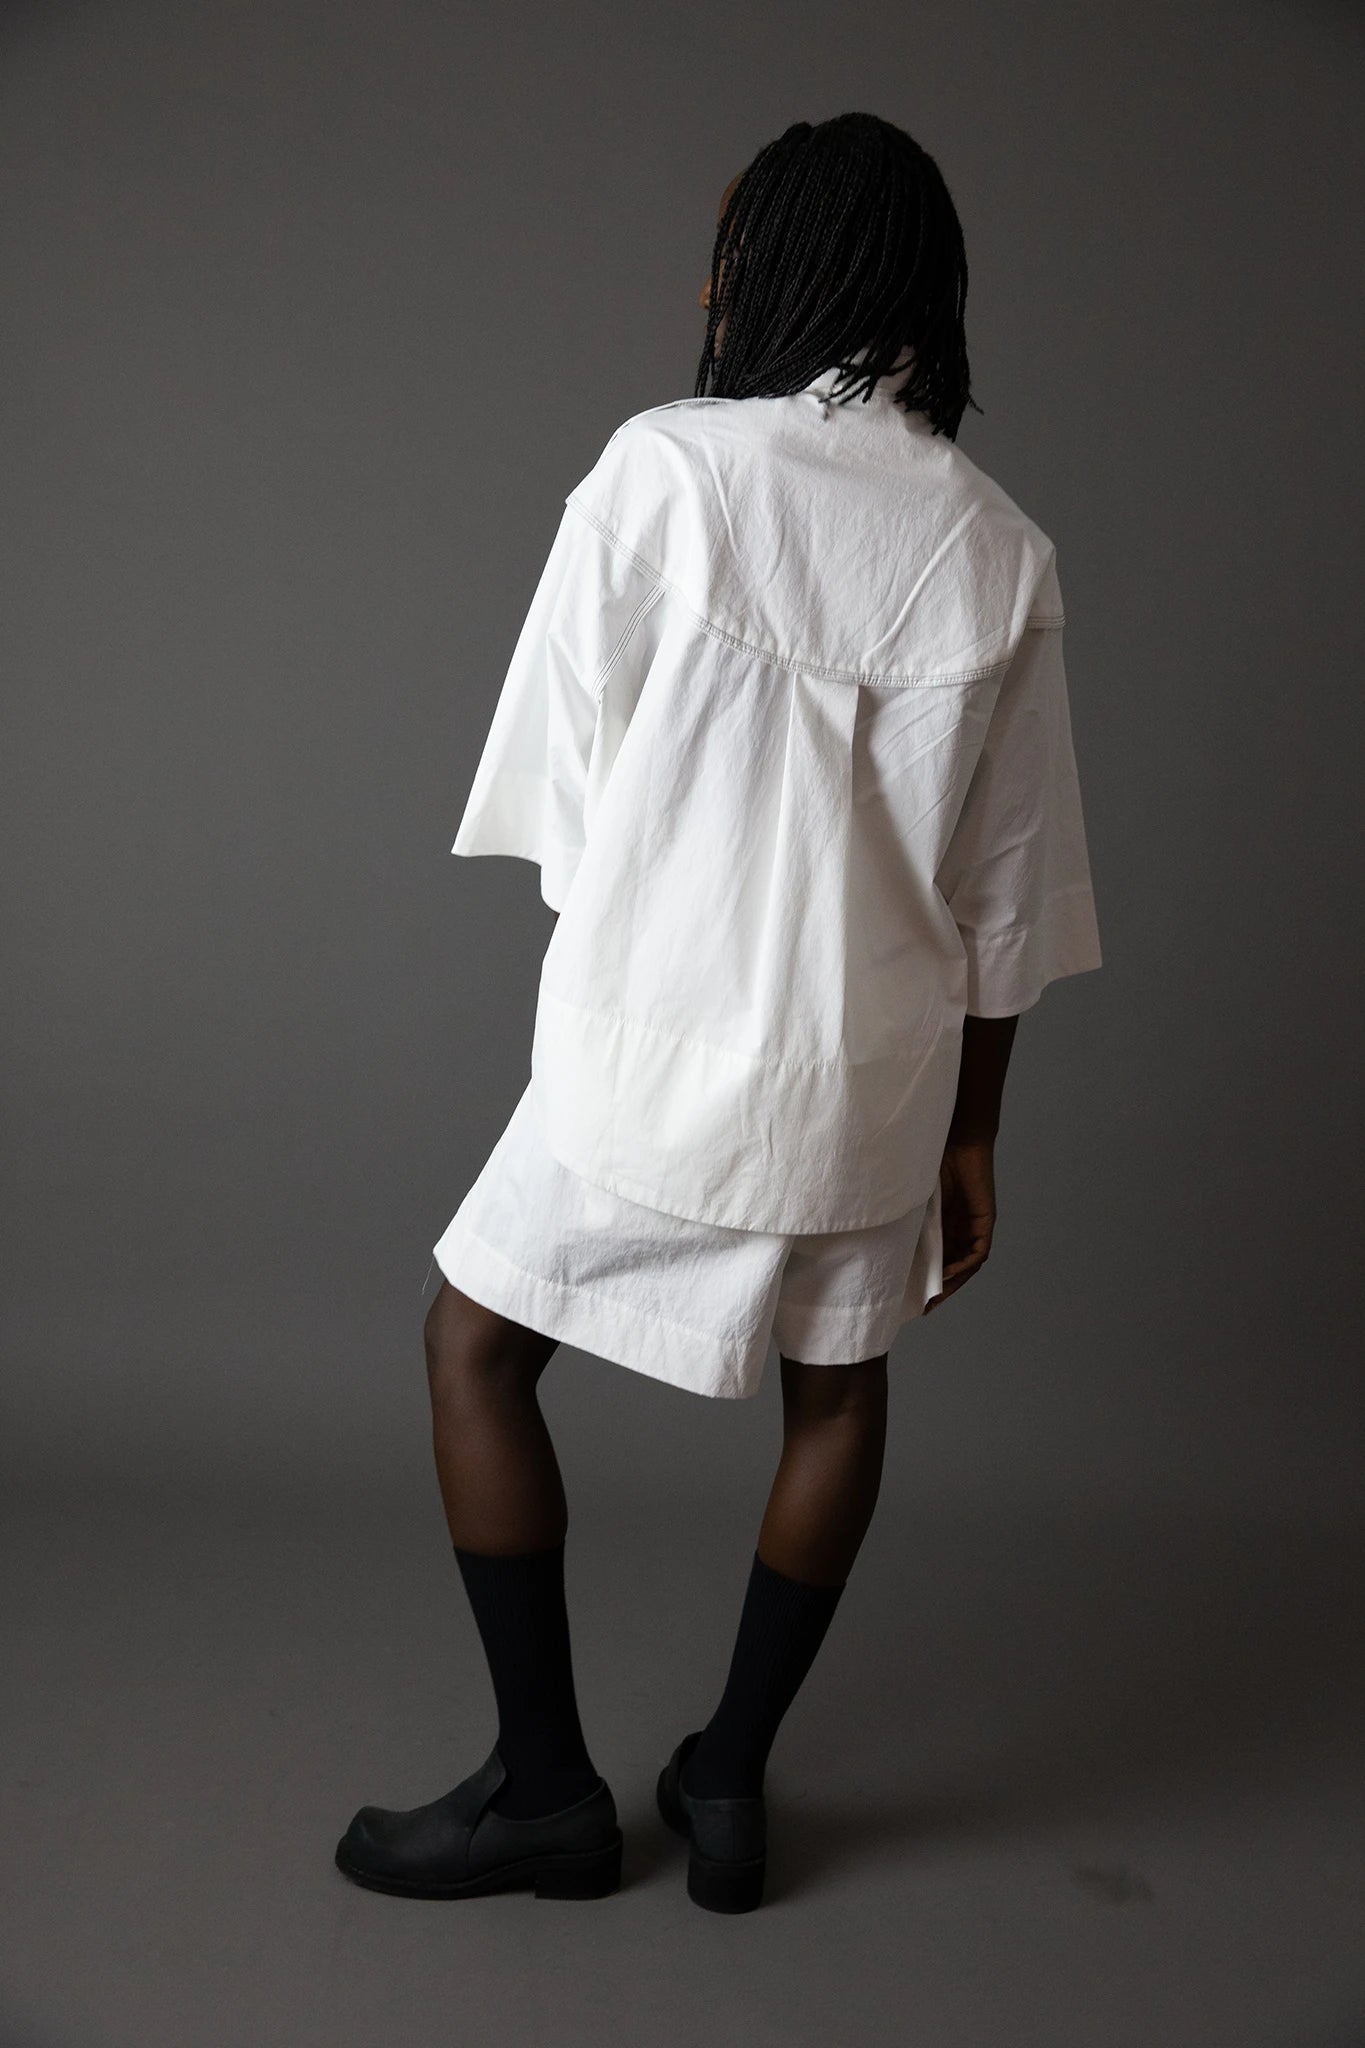 Dry Cotton Camp Shirt - Off White